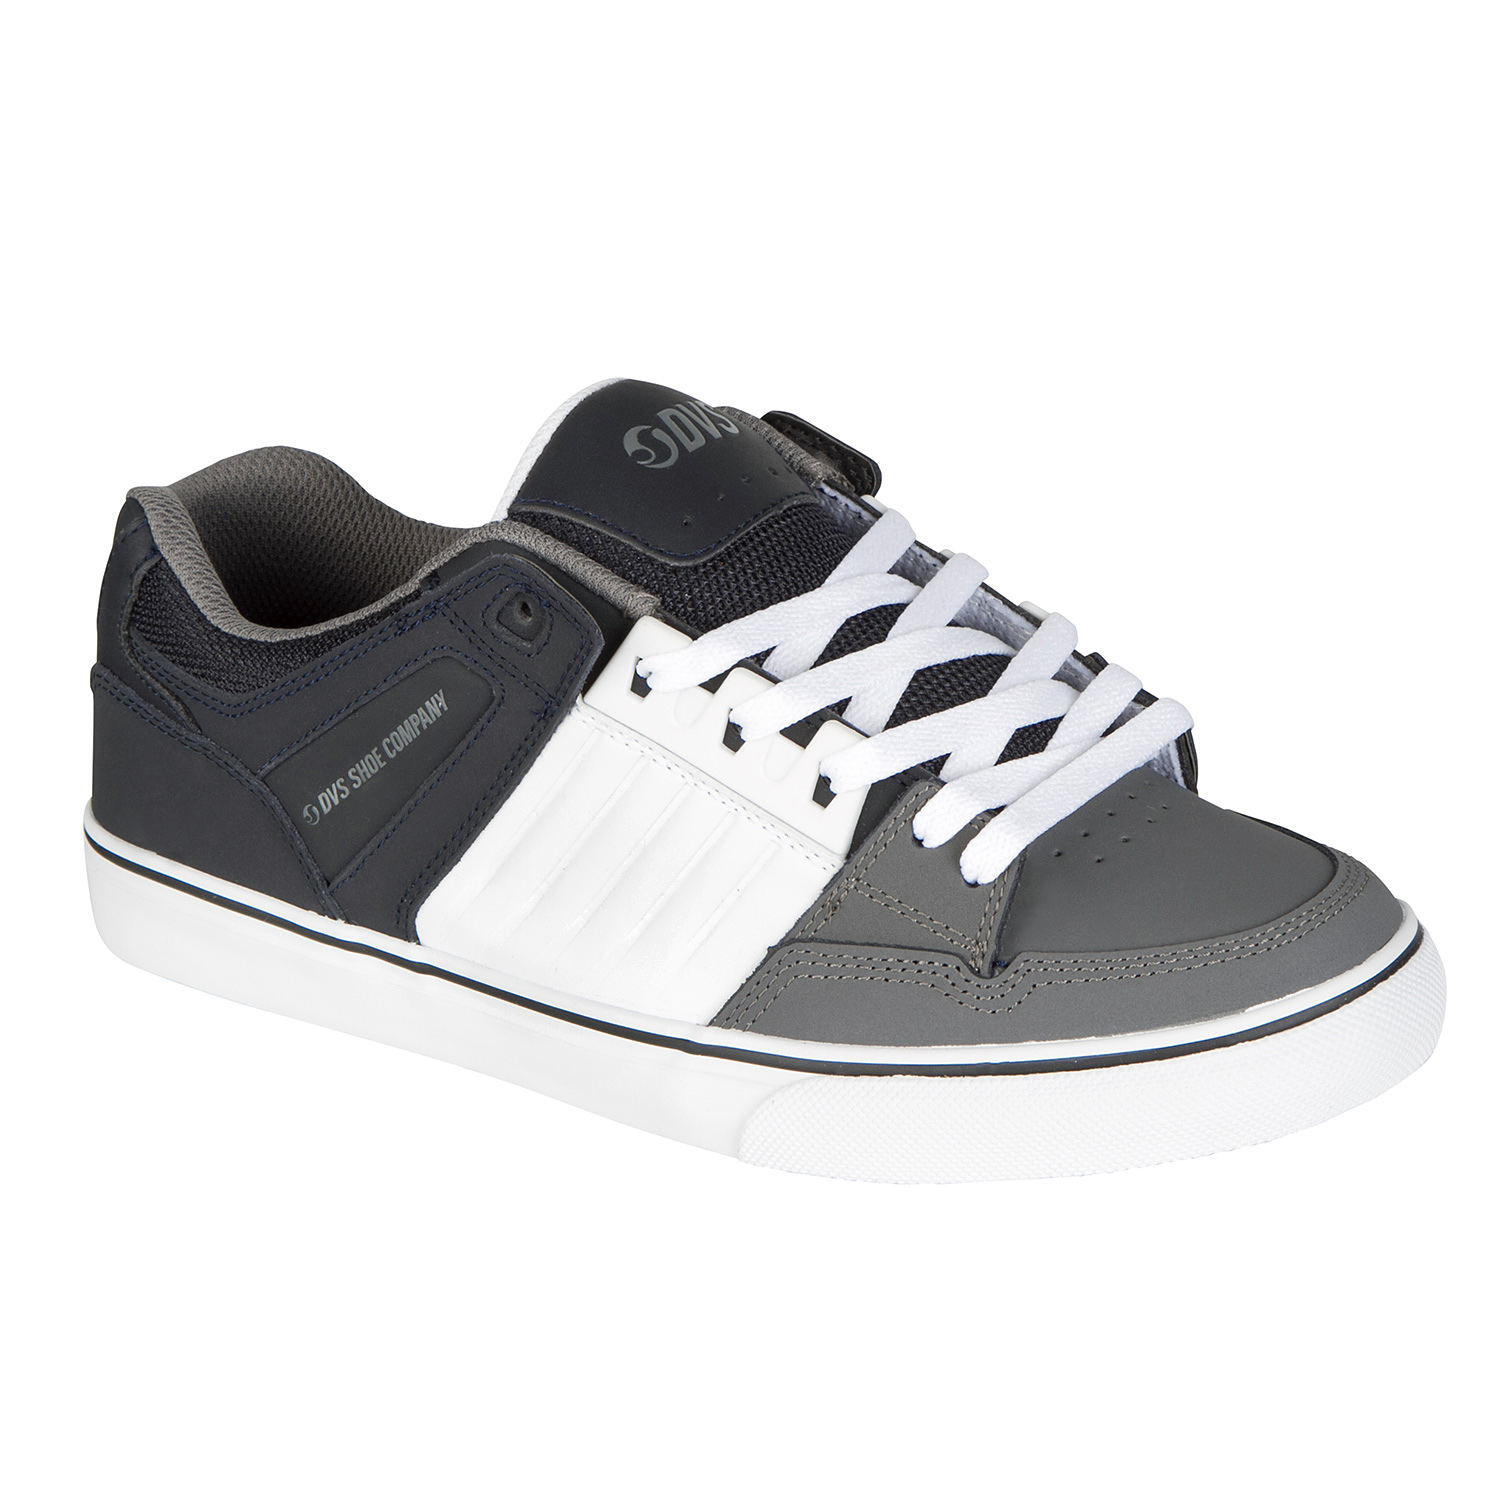 DVS Shoes Celsius CT Navy/White/Charcoal Leather